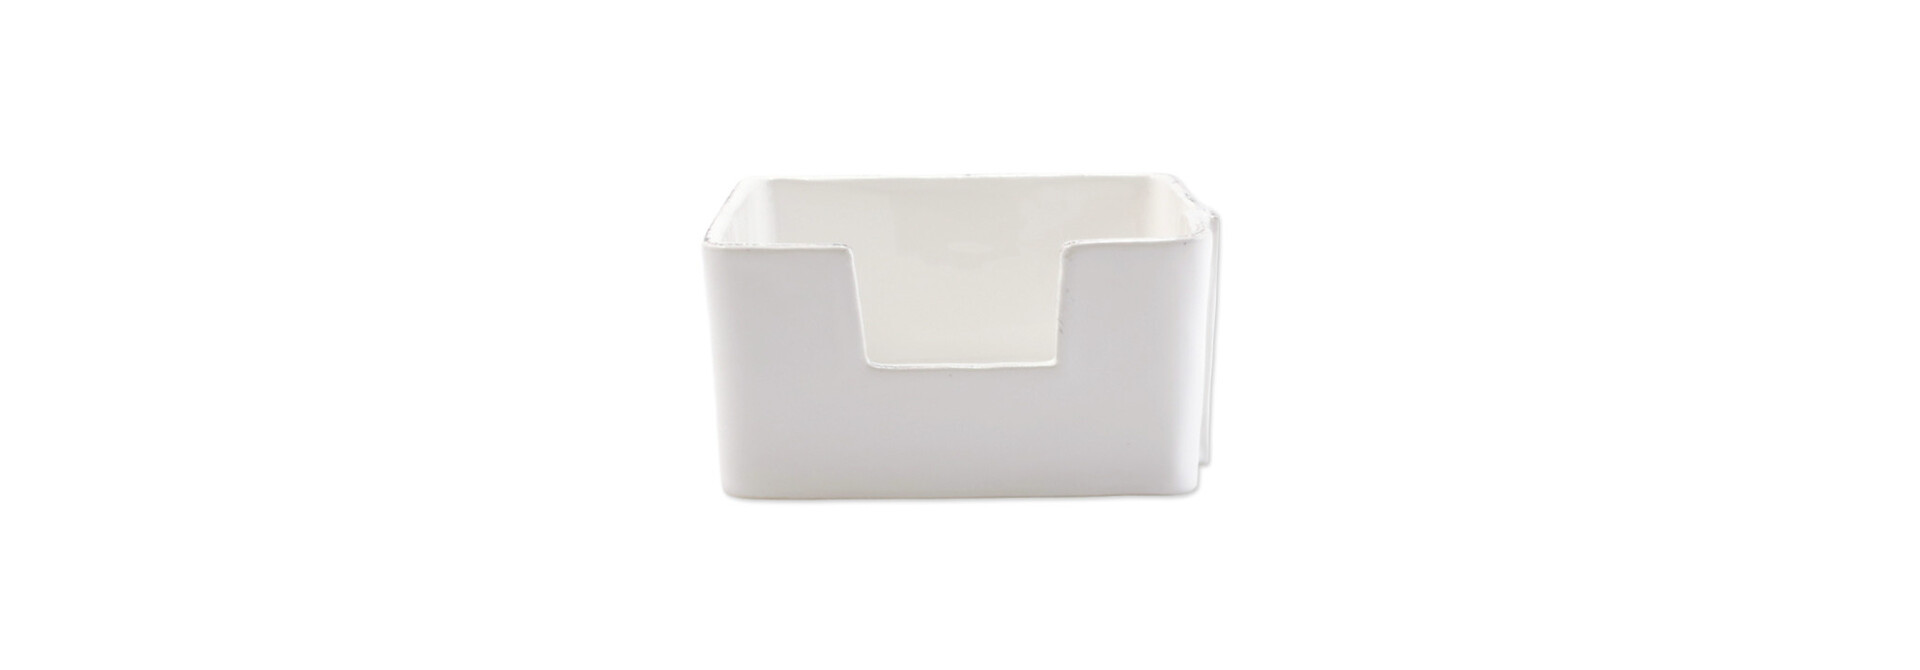 Lastra | The Cocktail Napkin  Holder Collection, White  - 6 Inch x 6 Inch x 3.25 Inch